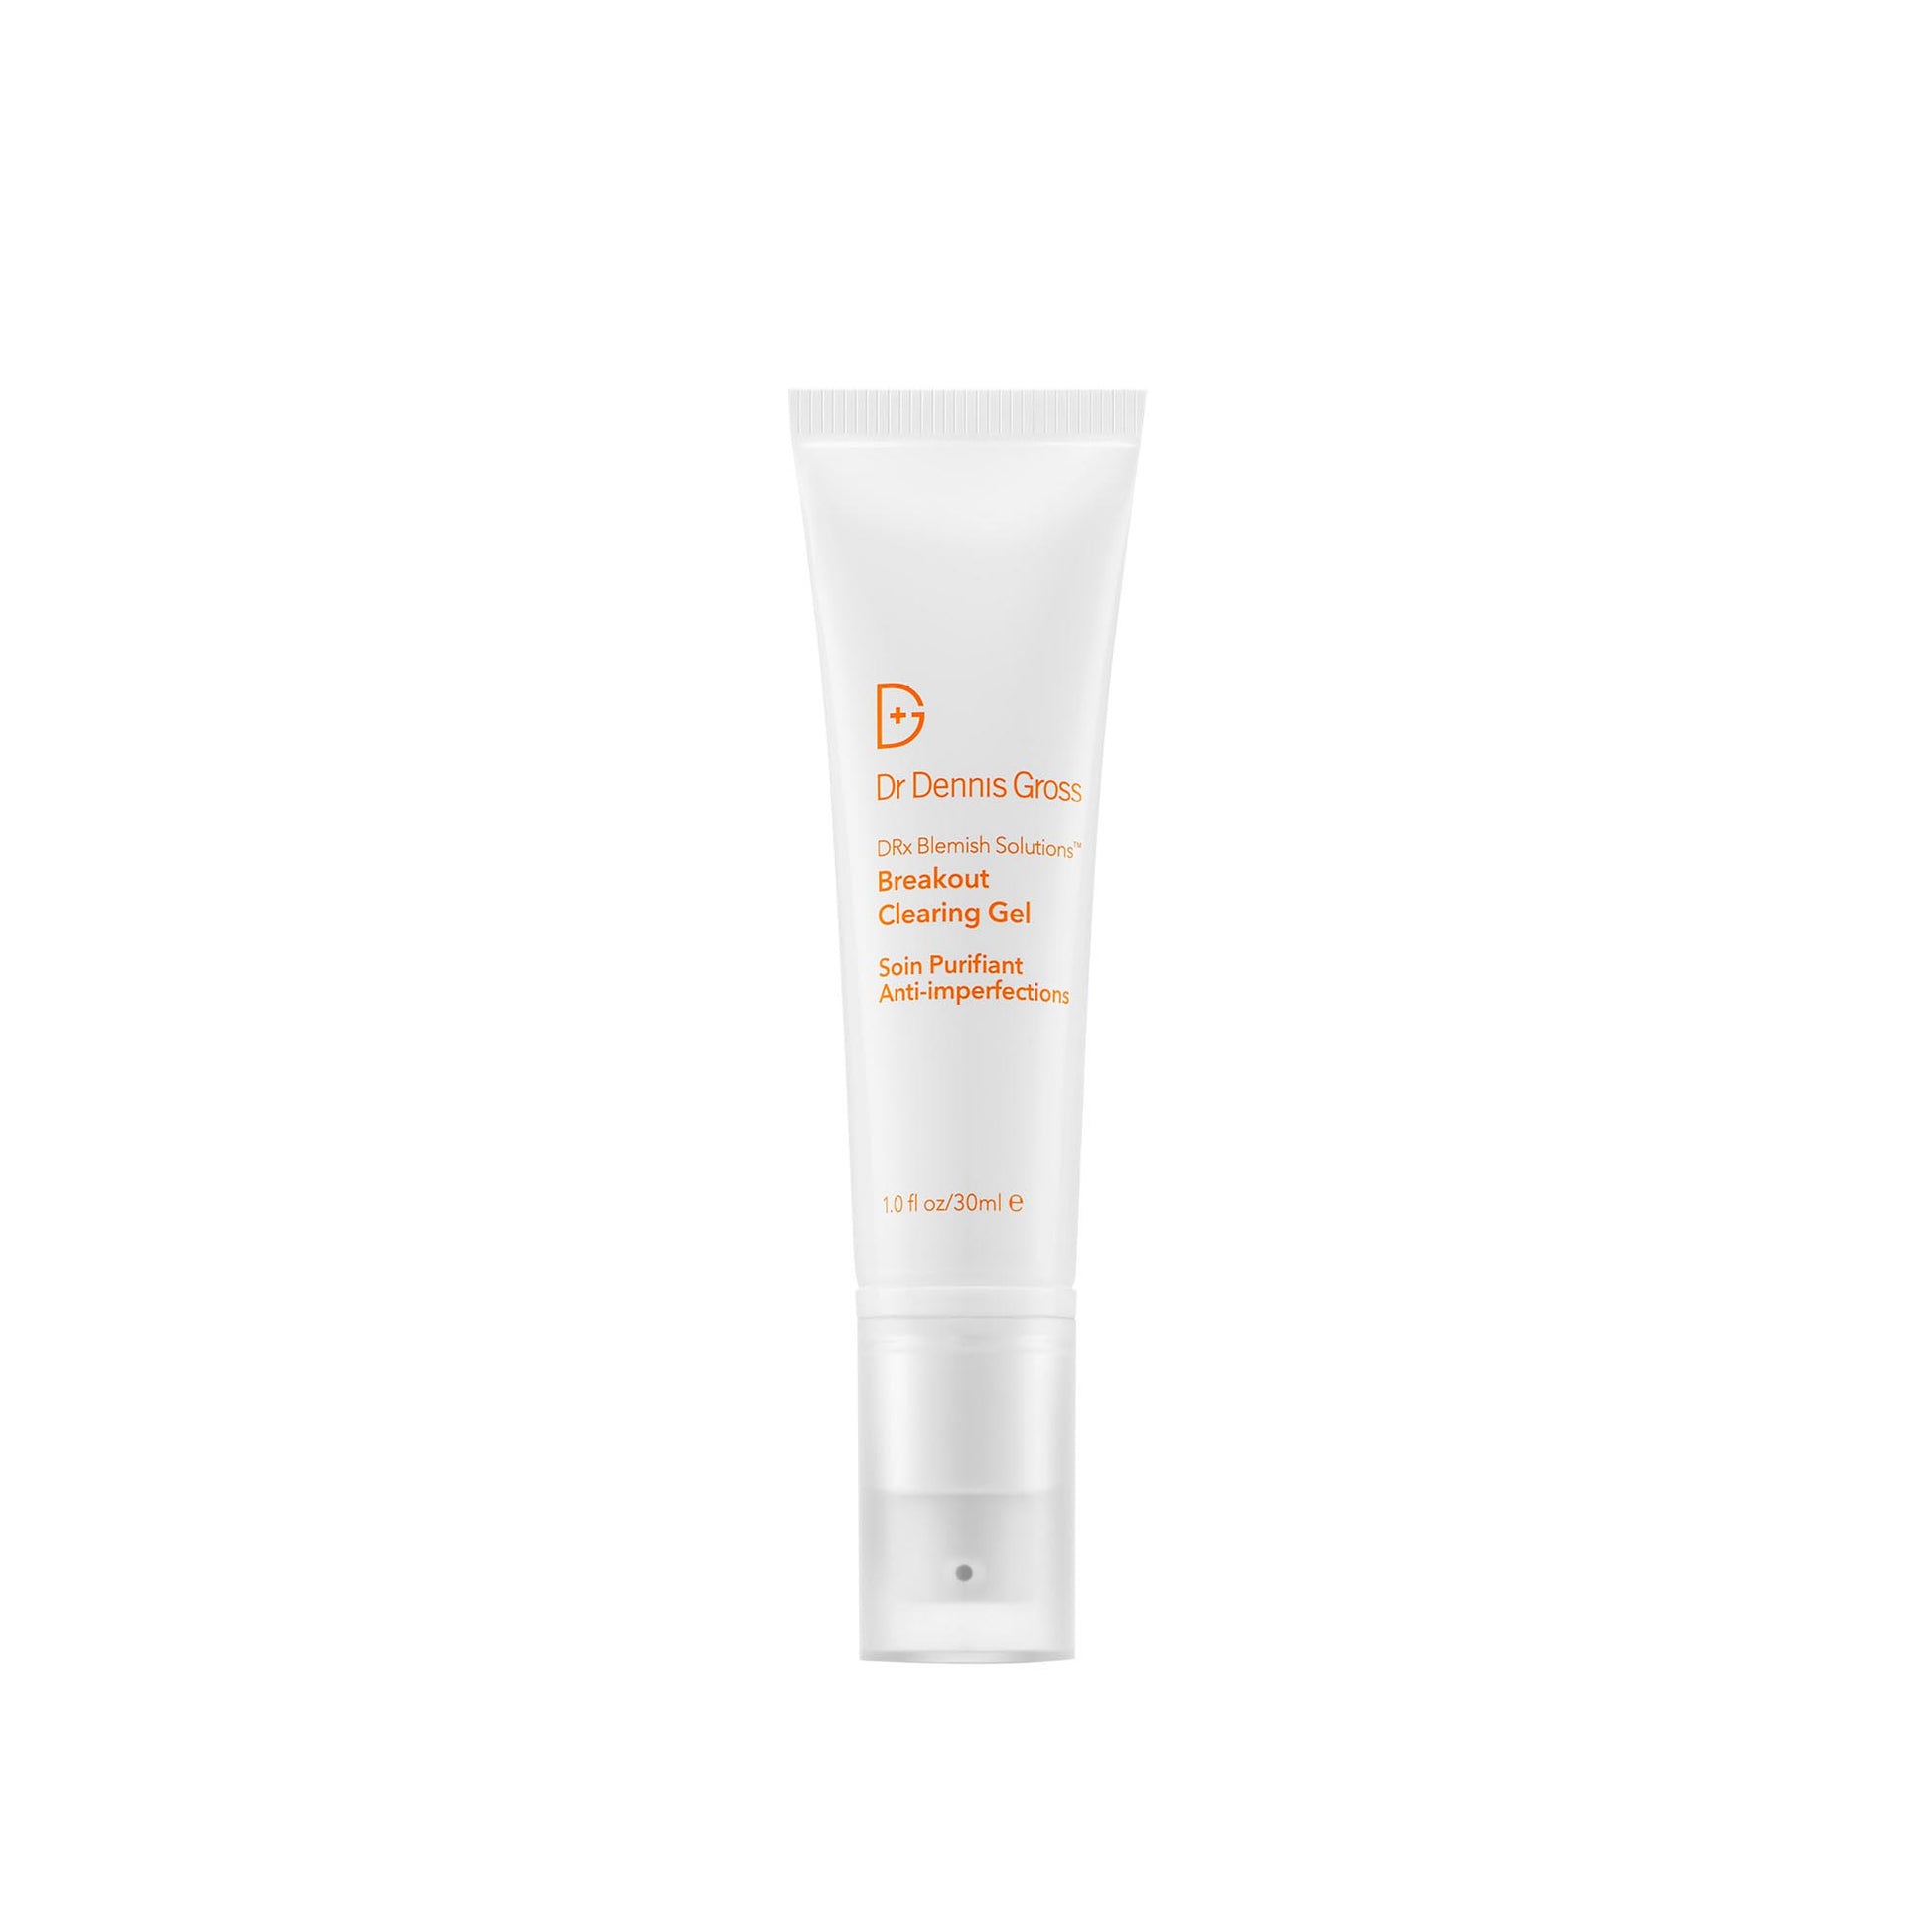 DRx Blemish Solutions™ Breakout Clearing Gel